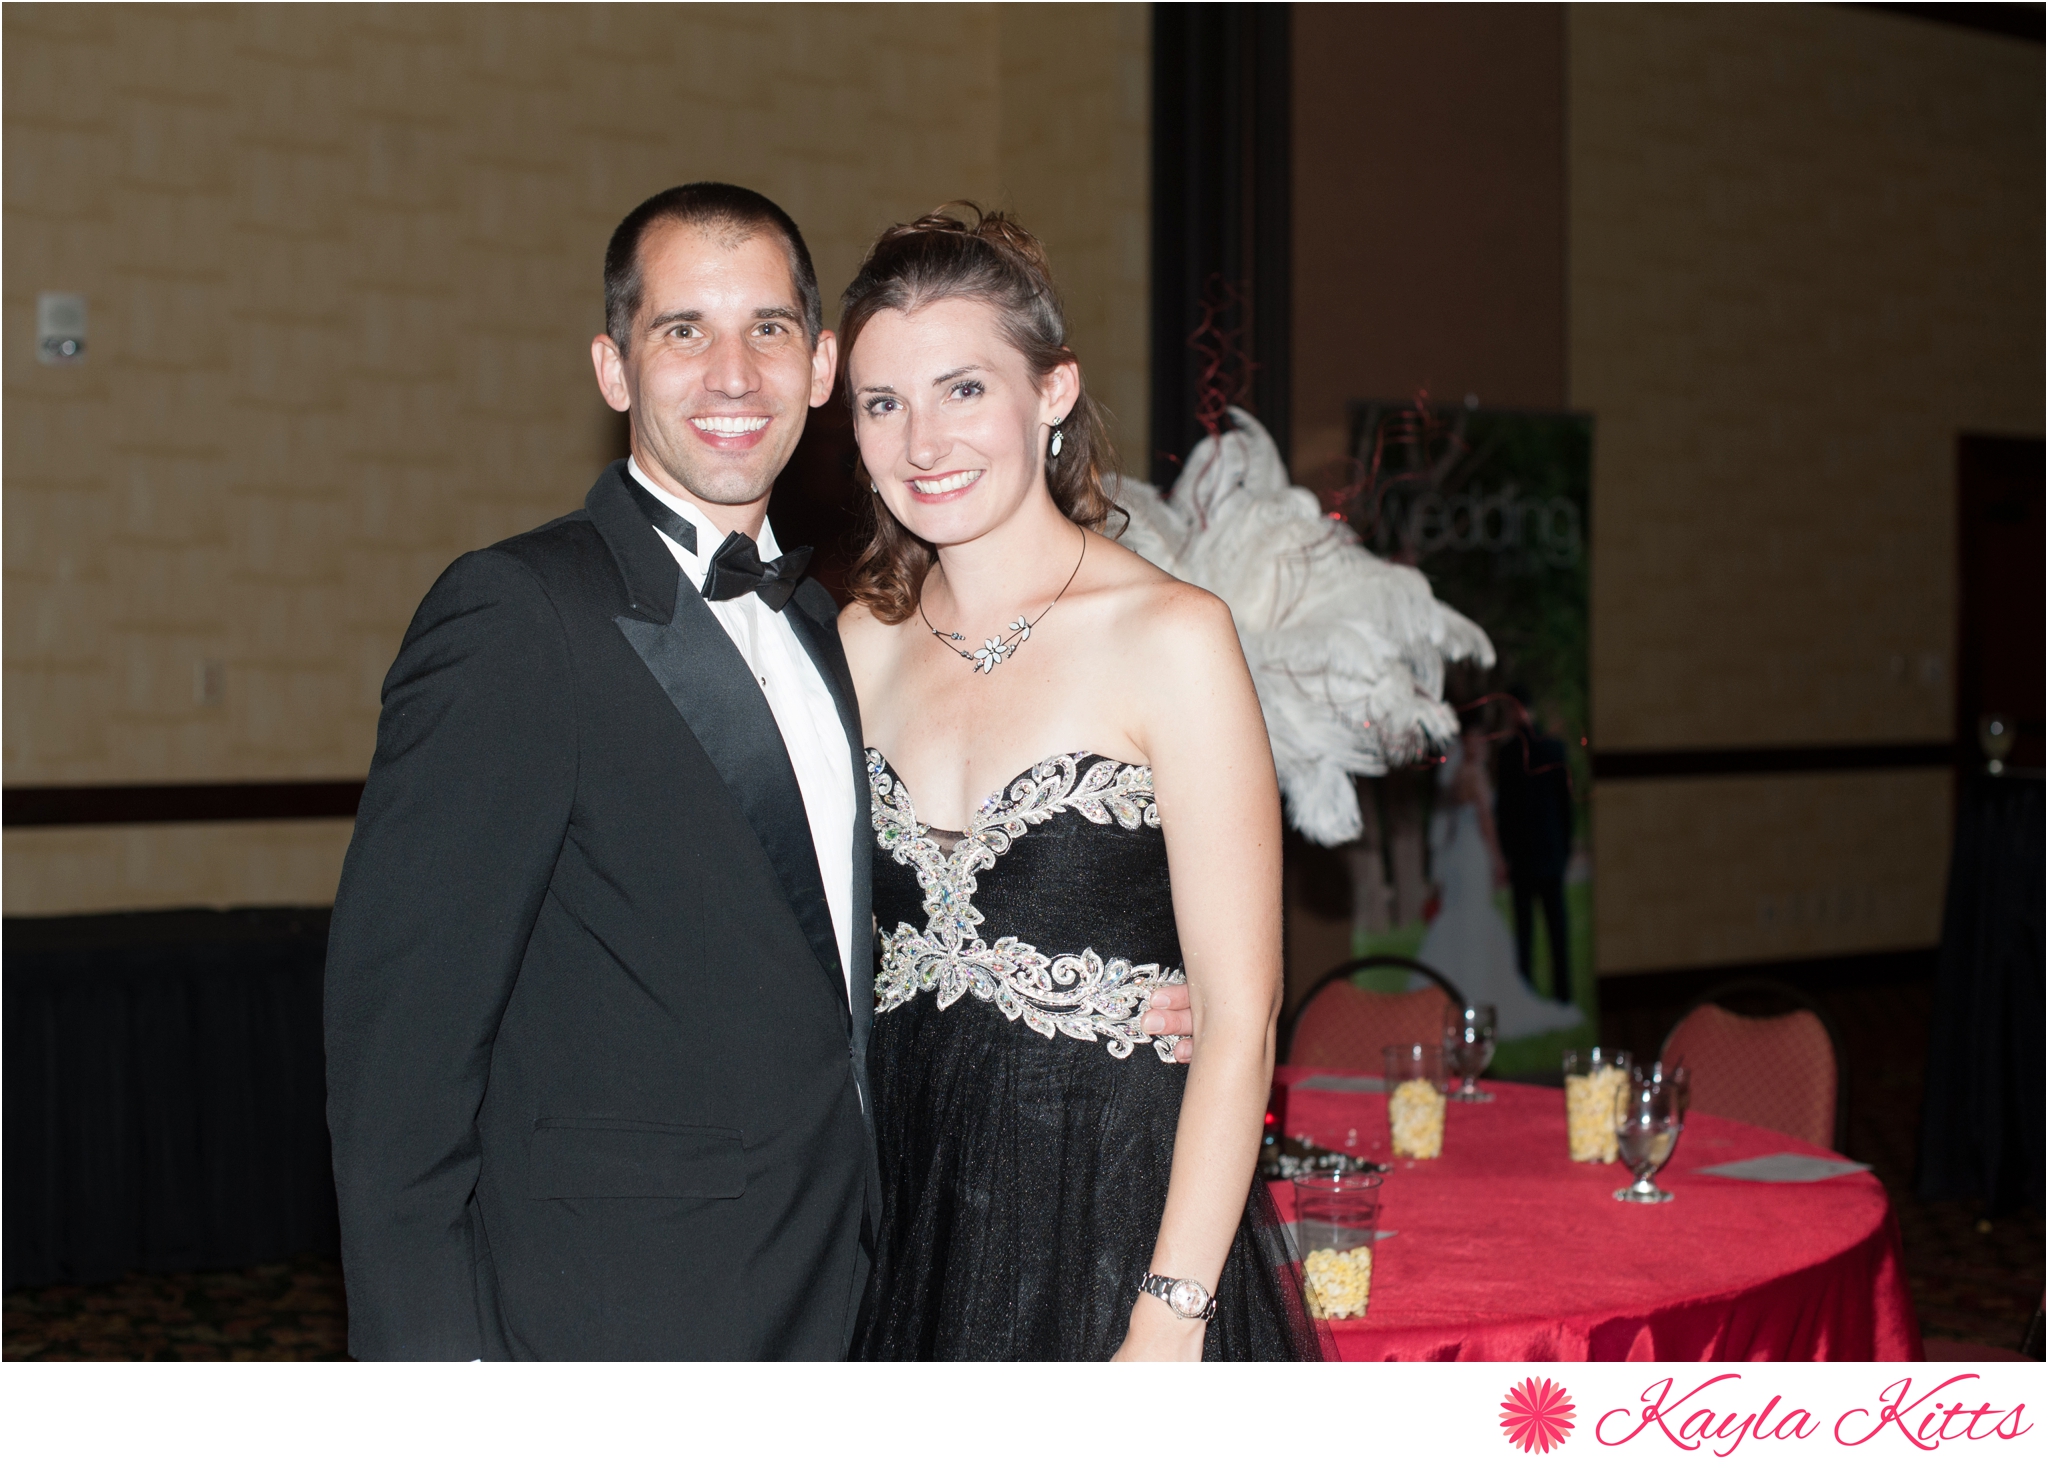 kayla kitts photography - perfect wedding guide - client appreciation party - albuqueruqe marriott_0017.jpg